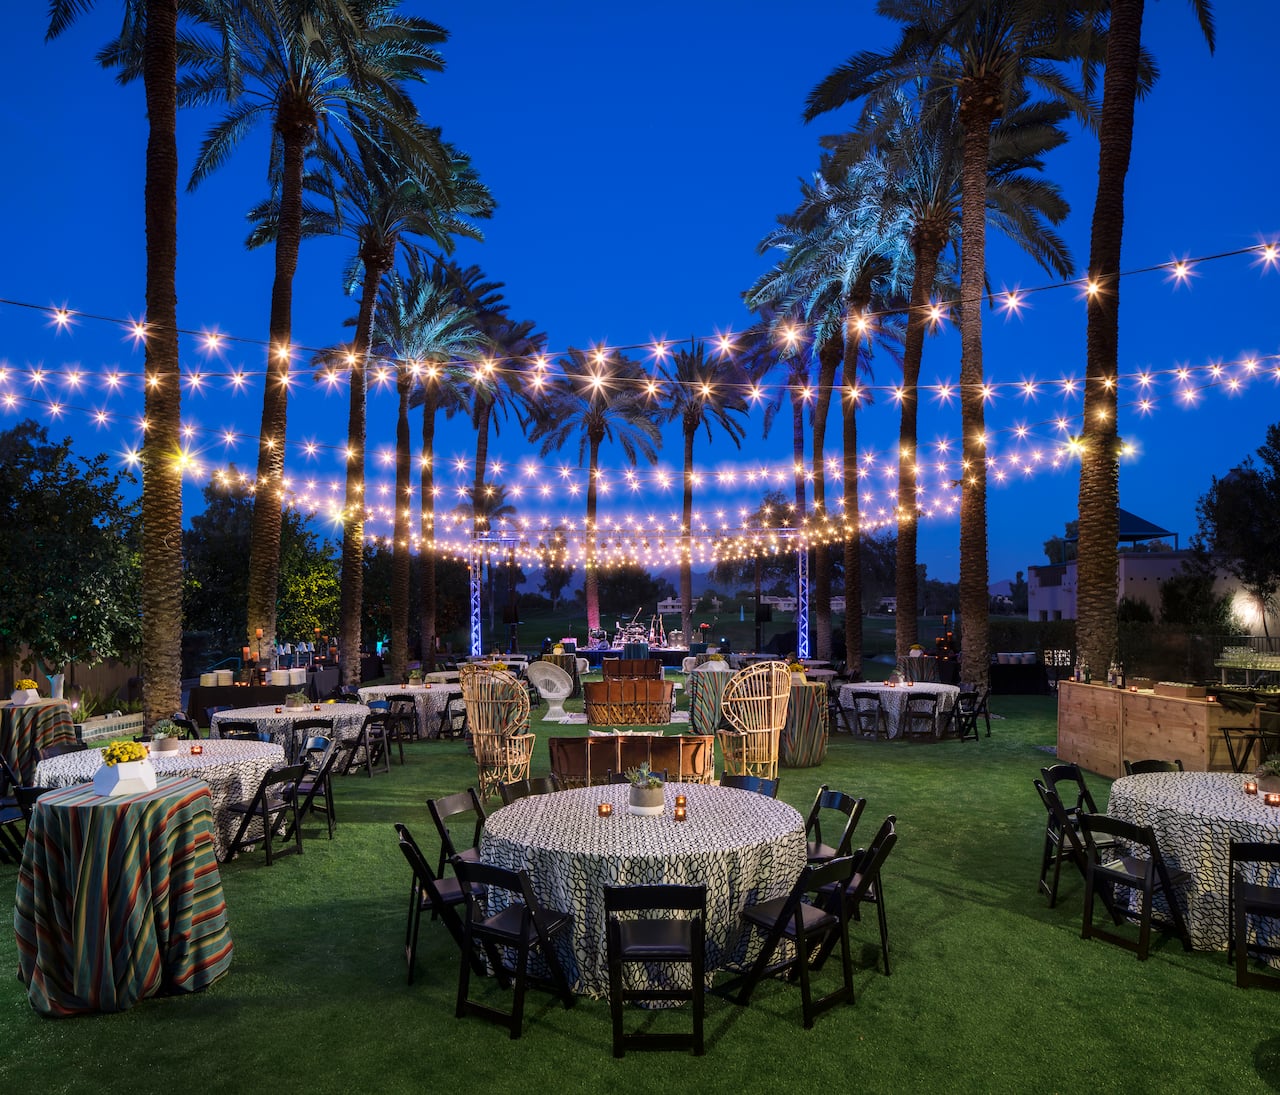 Outdoor event space in Scottsdale, AZ